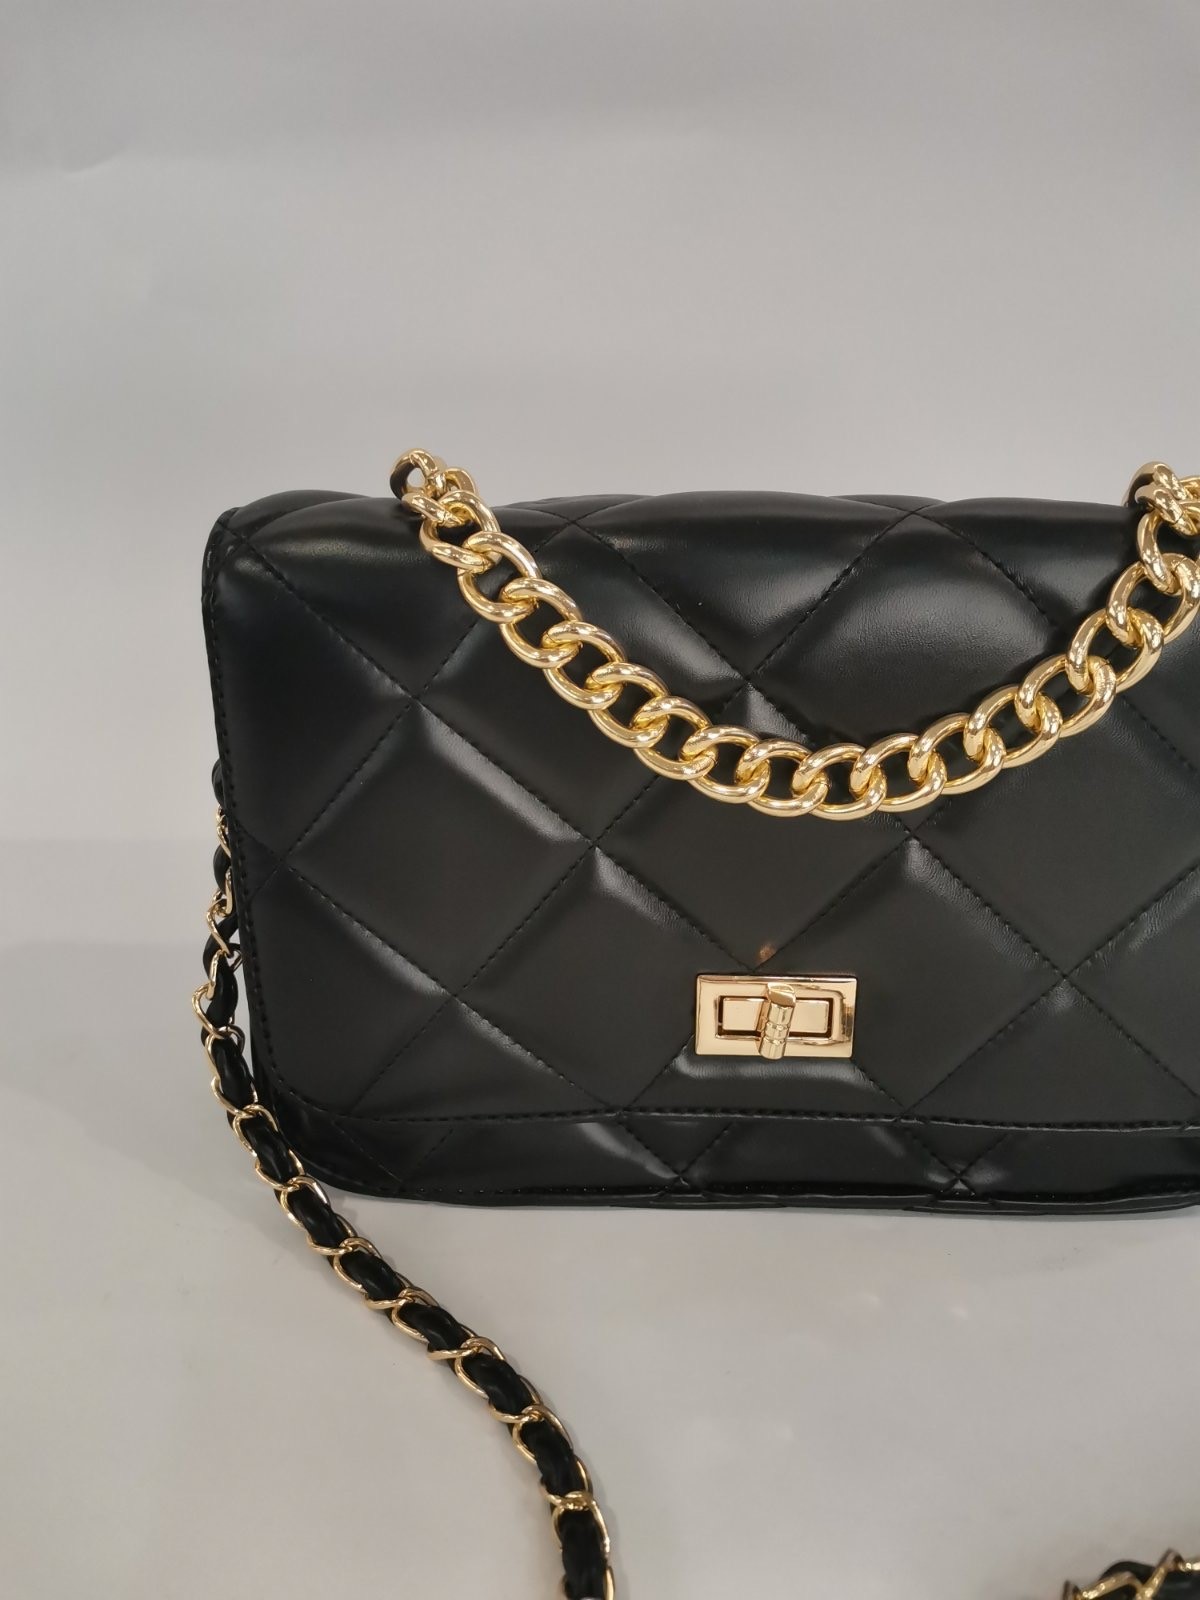 Shoulder bag with Chain in black